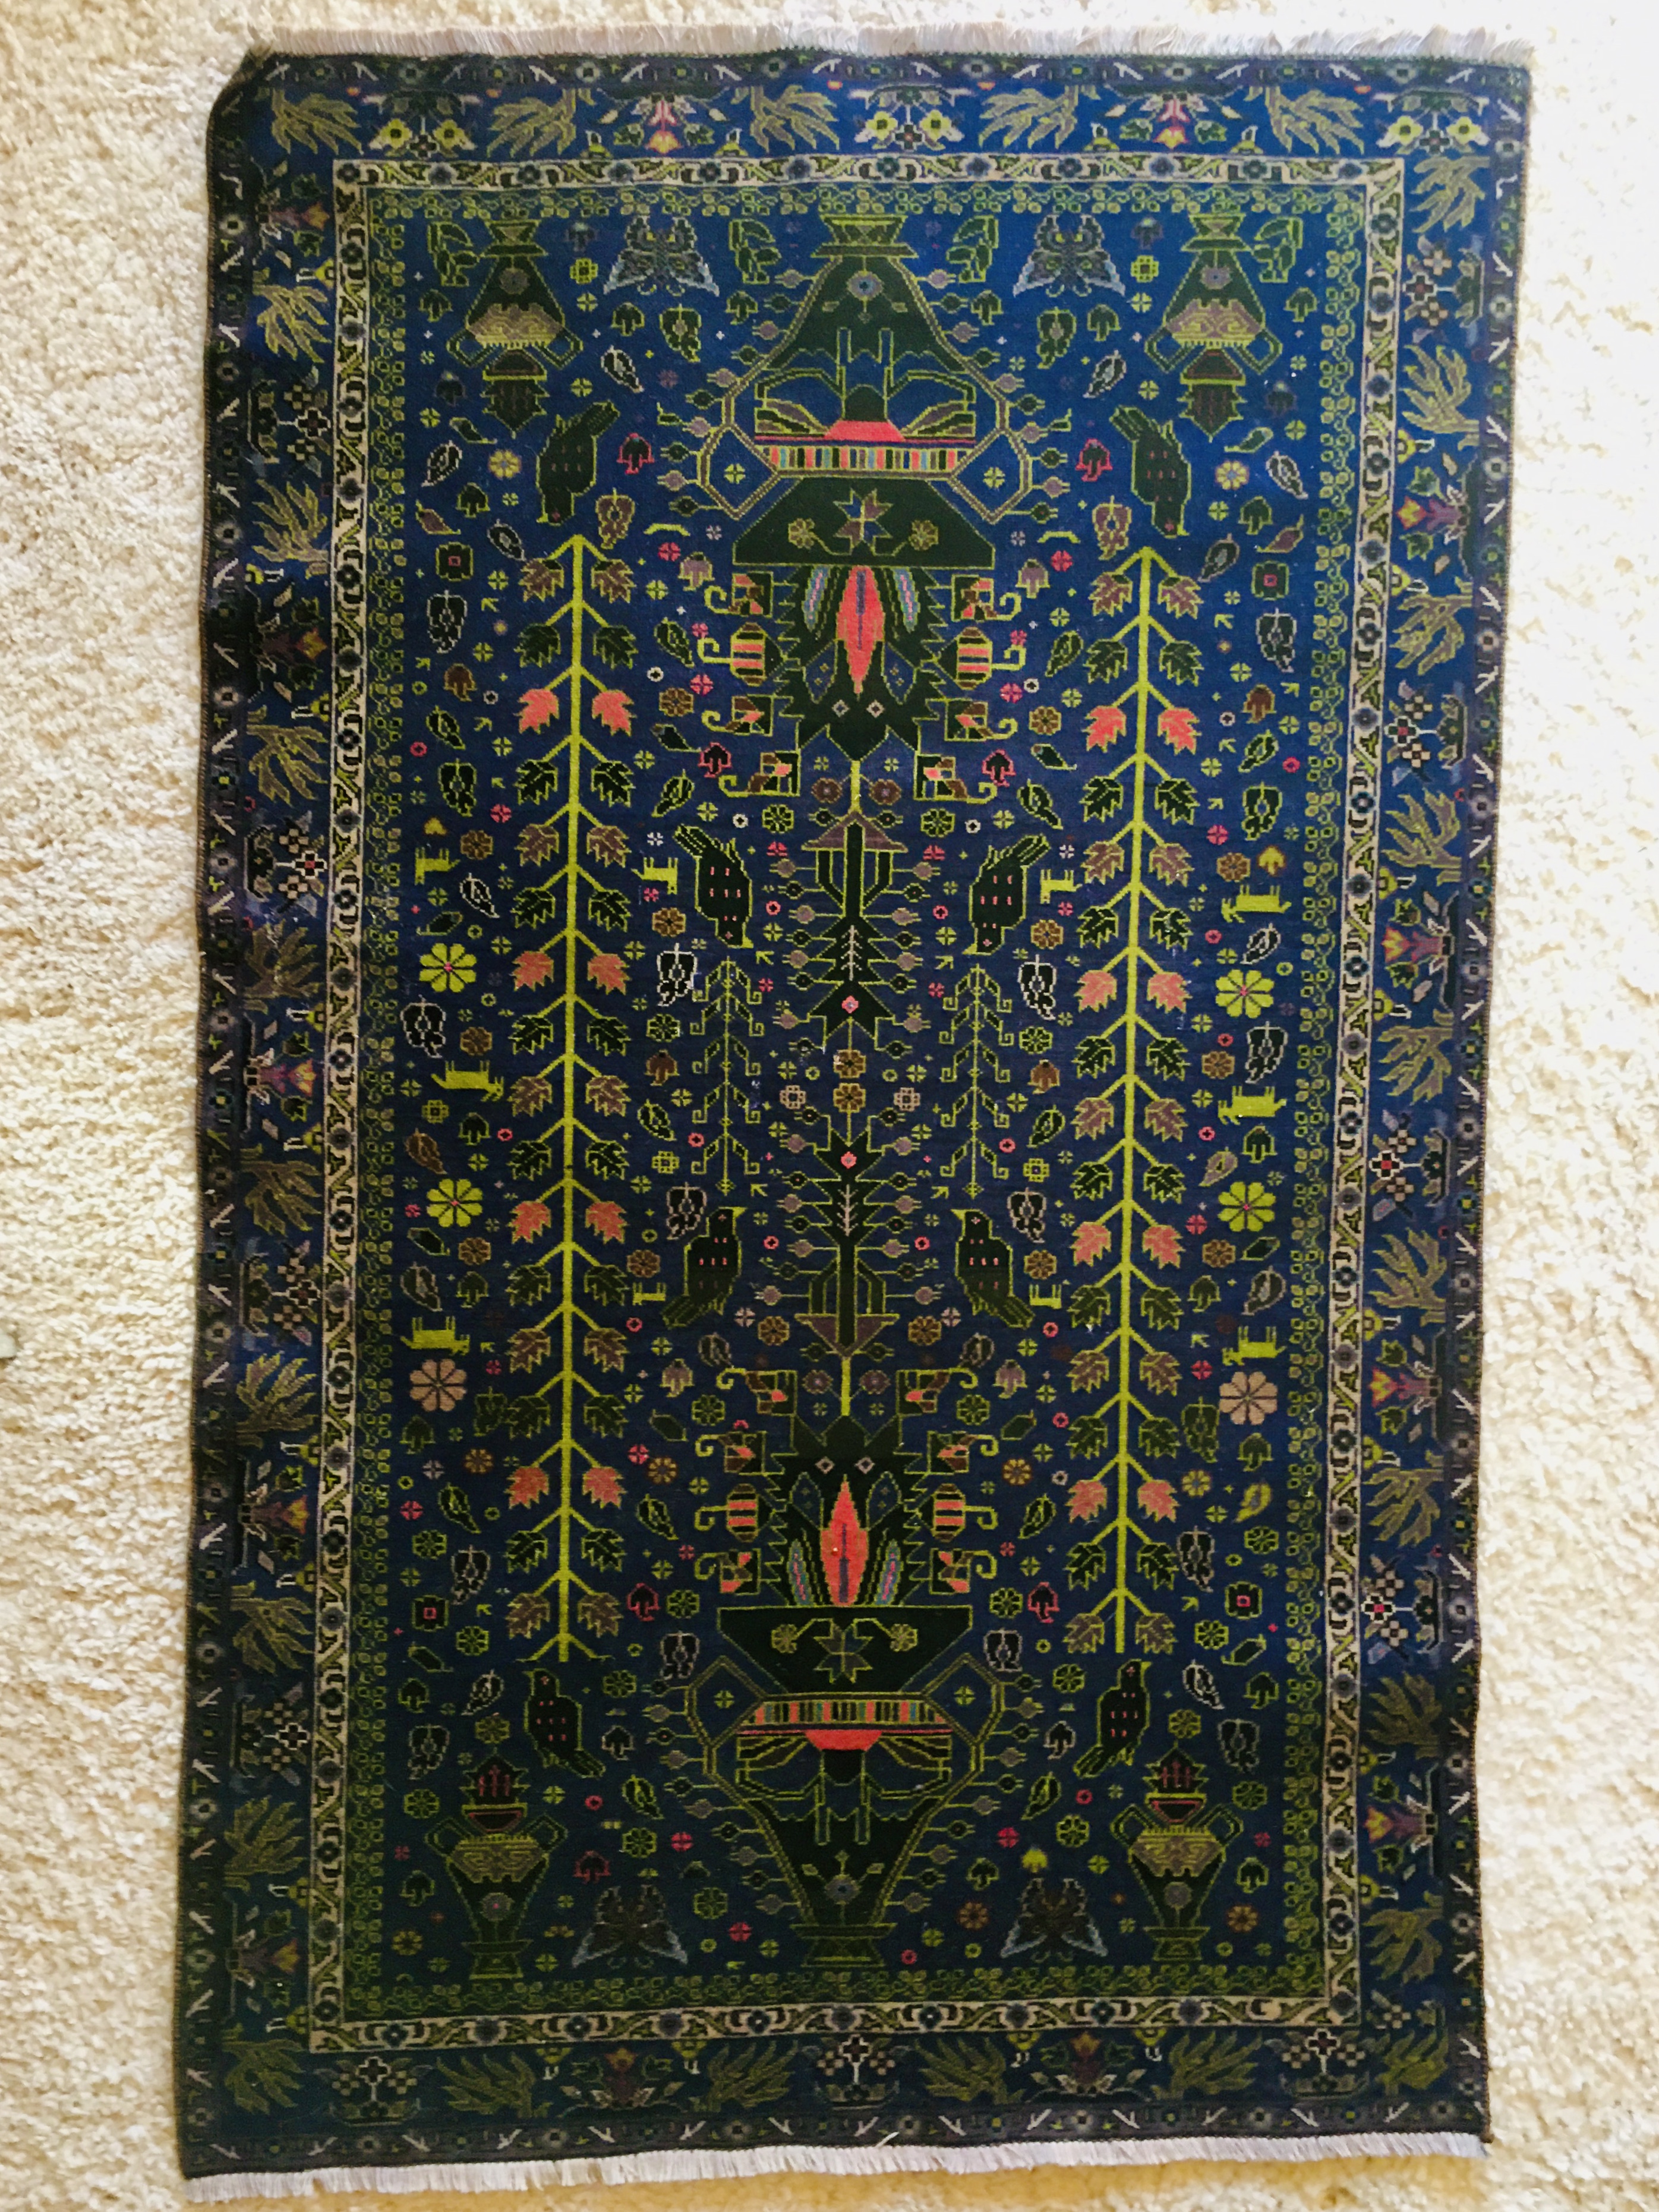 A dark blue rug with green vines and black birds, among other elements